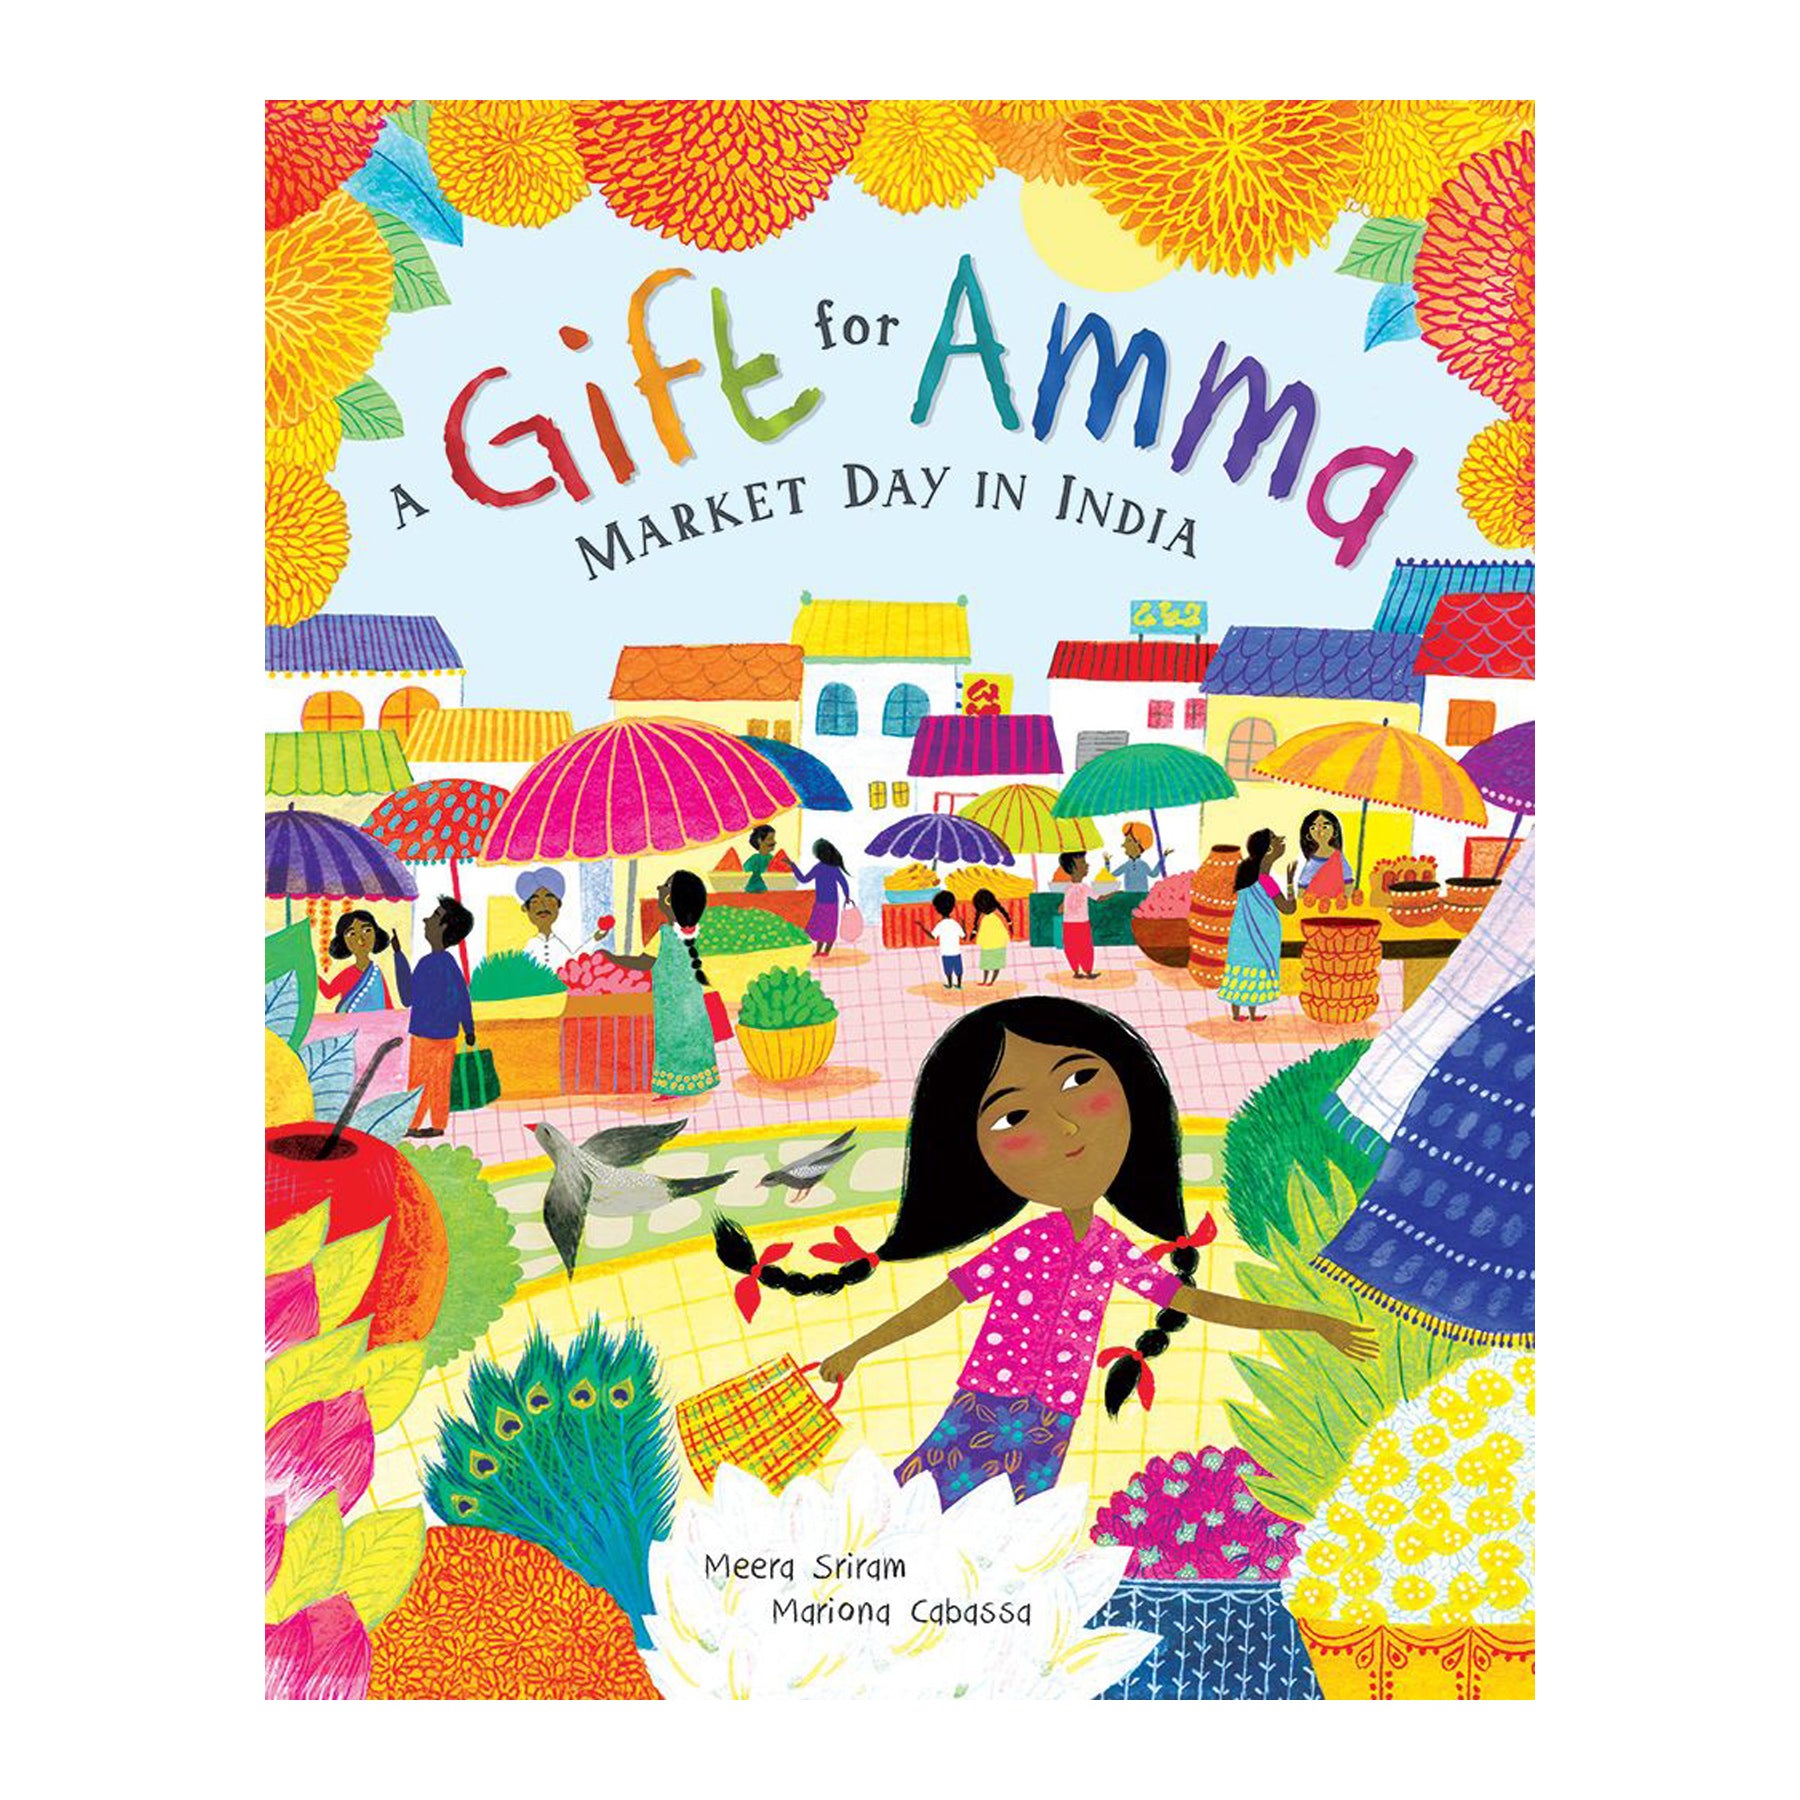 The　A　Gift　Market　for　Art　in　Amma:　Day　Museum　India　Walters